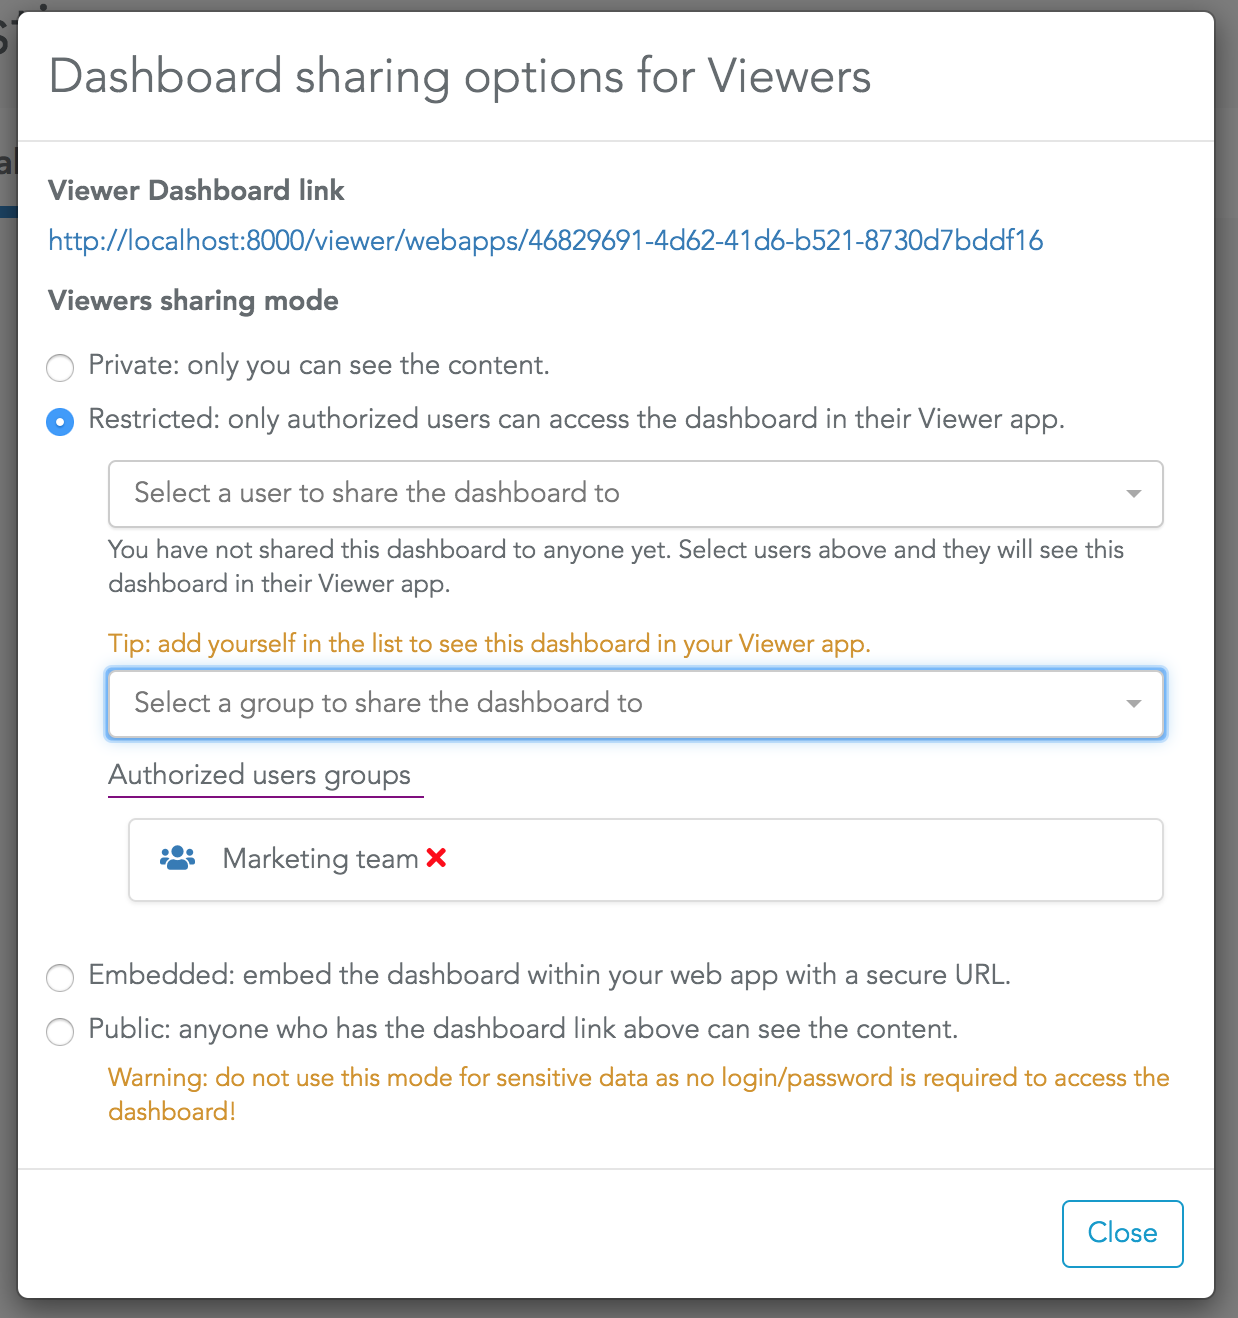 Share a dashboard to a group